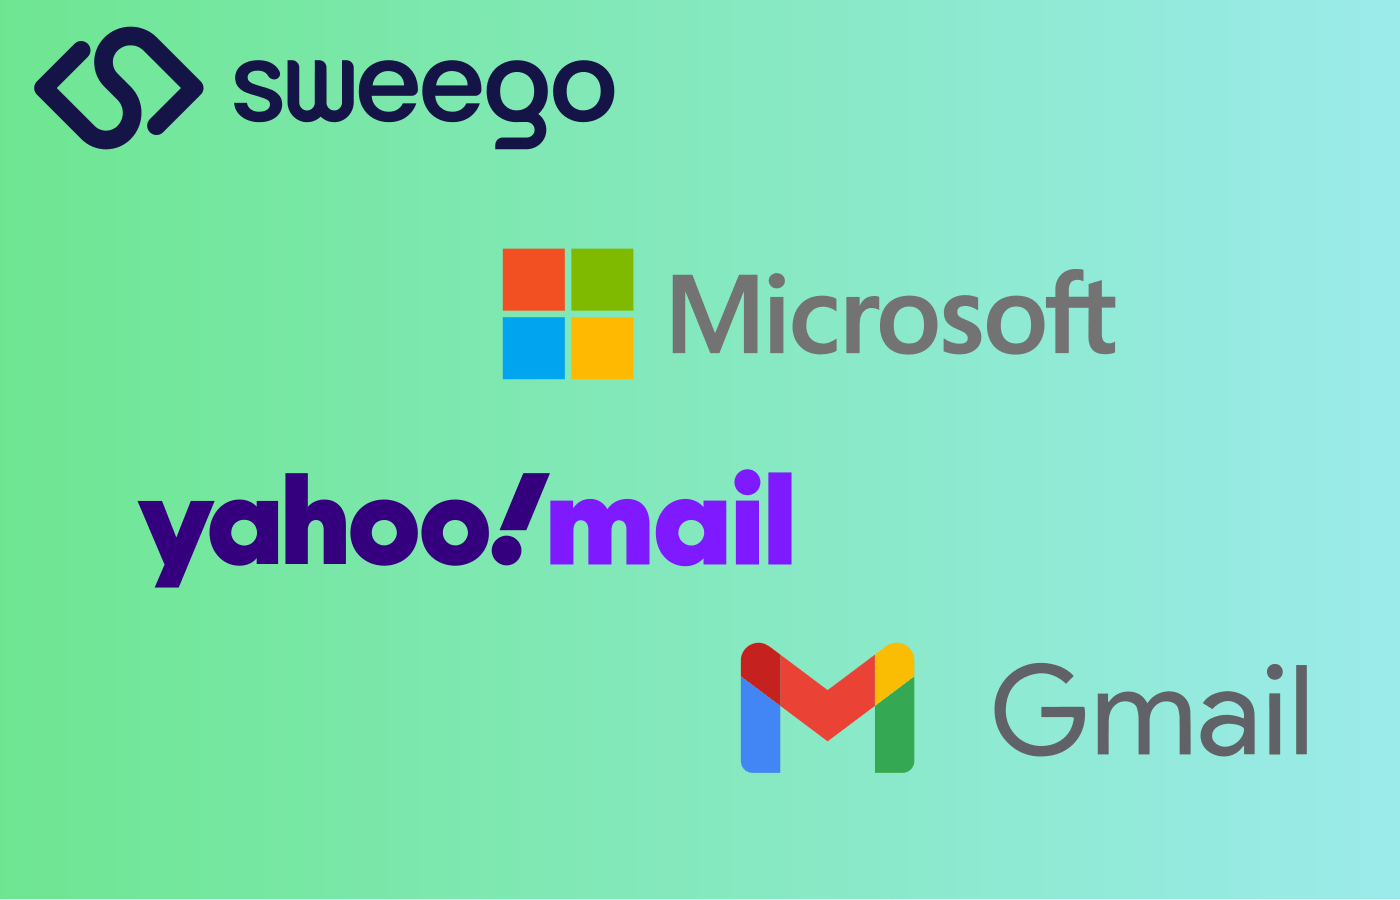 Microsoft aligns with Google and Yahoo for sender guidelines